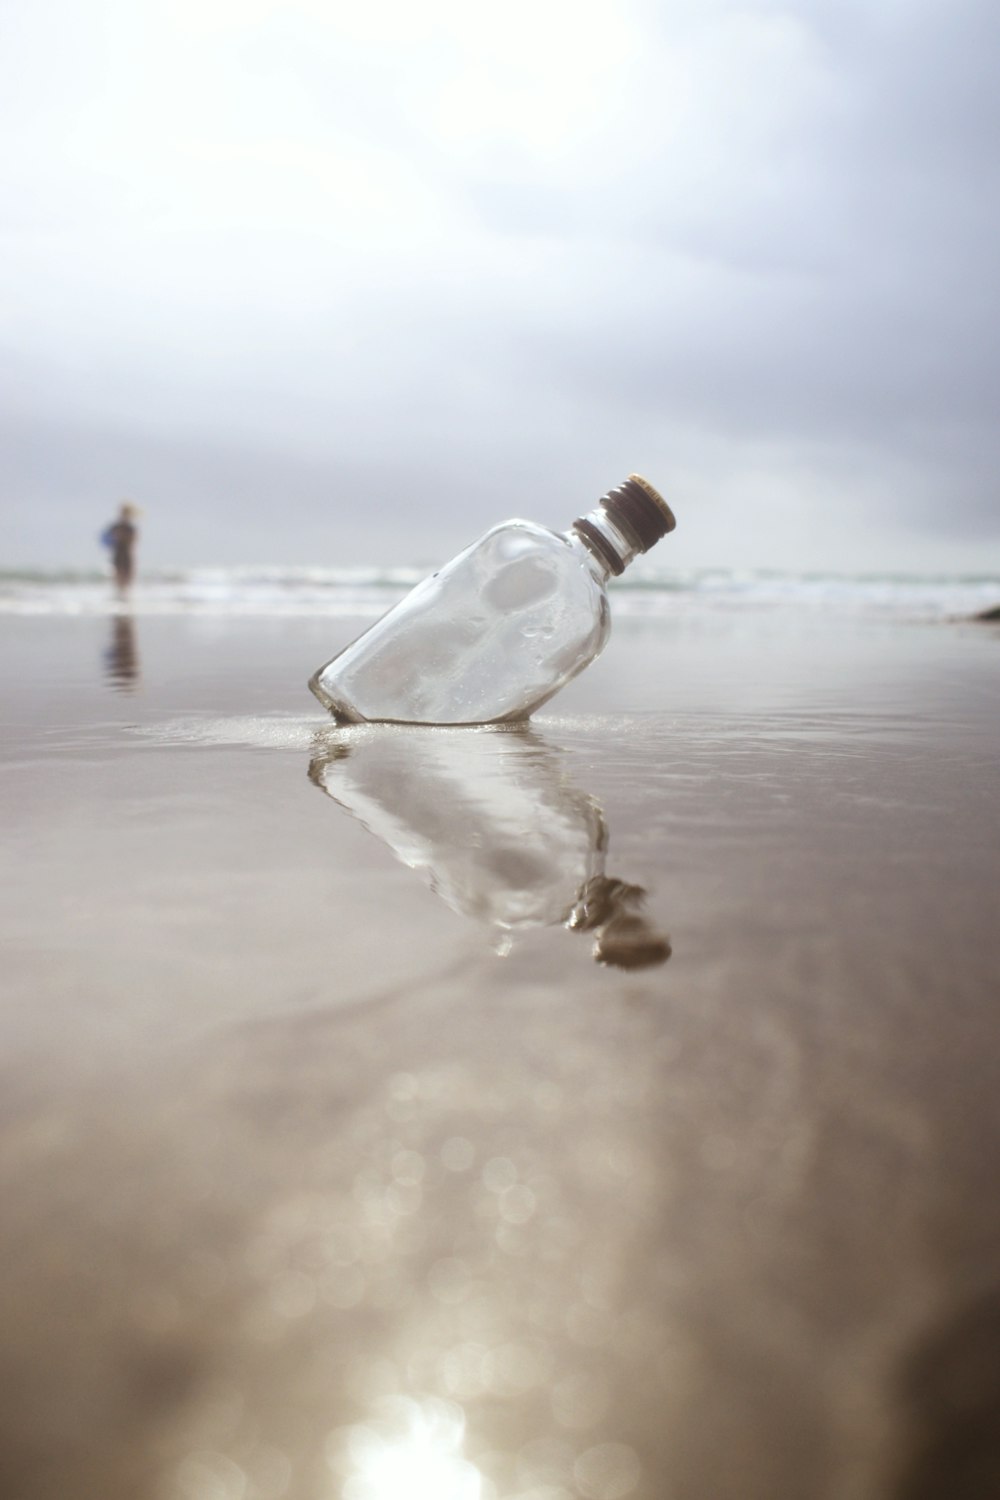 a bottle that is sitting in the sand